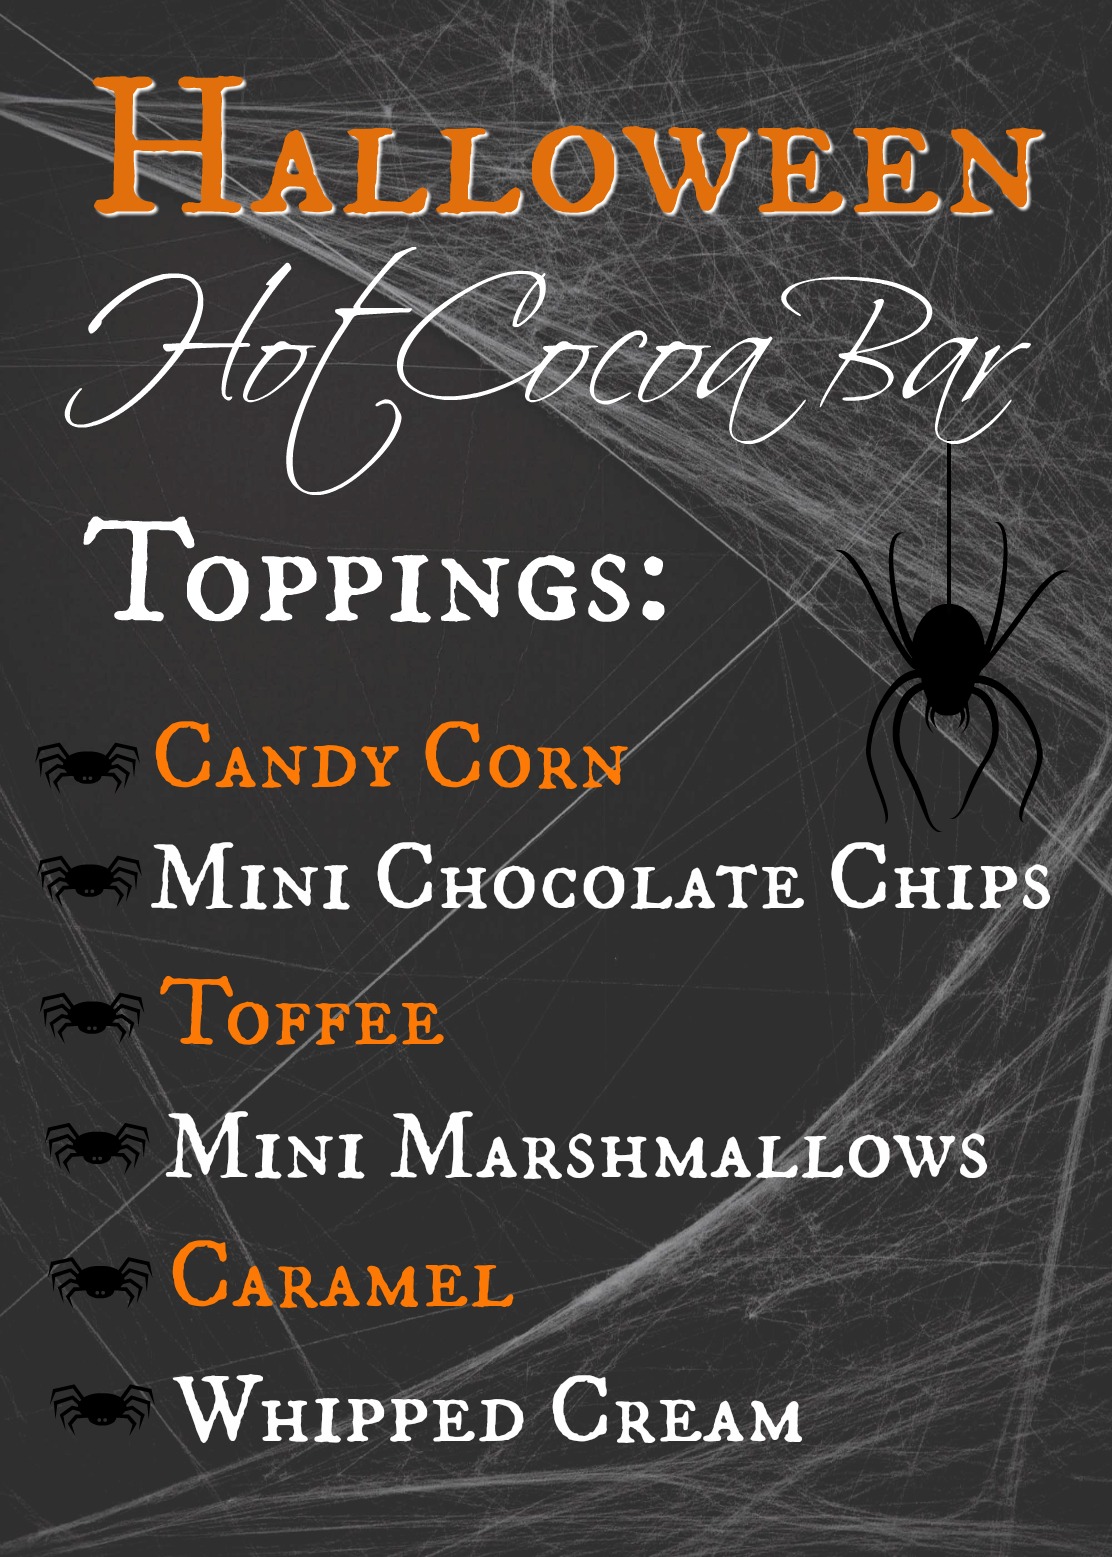 Tips for an Epic Haunted Hot Cocoa Bar 